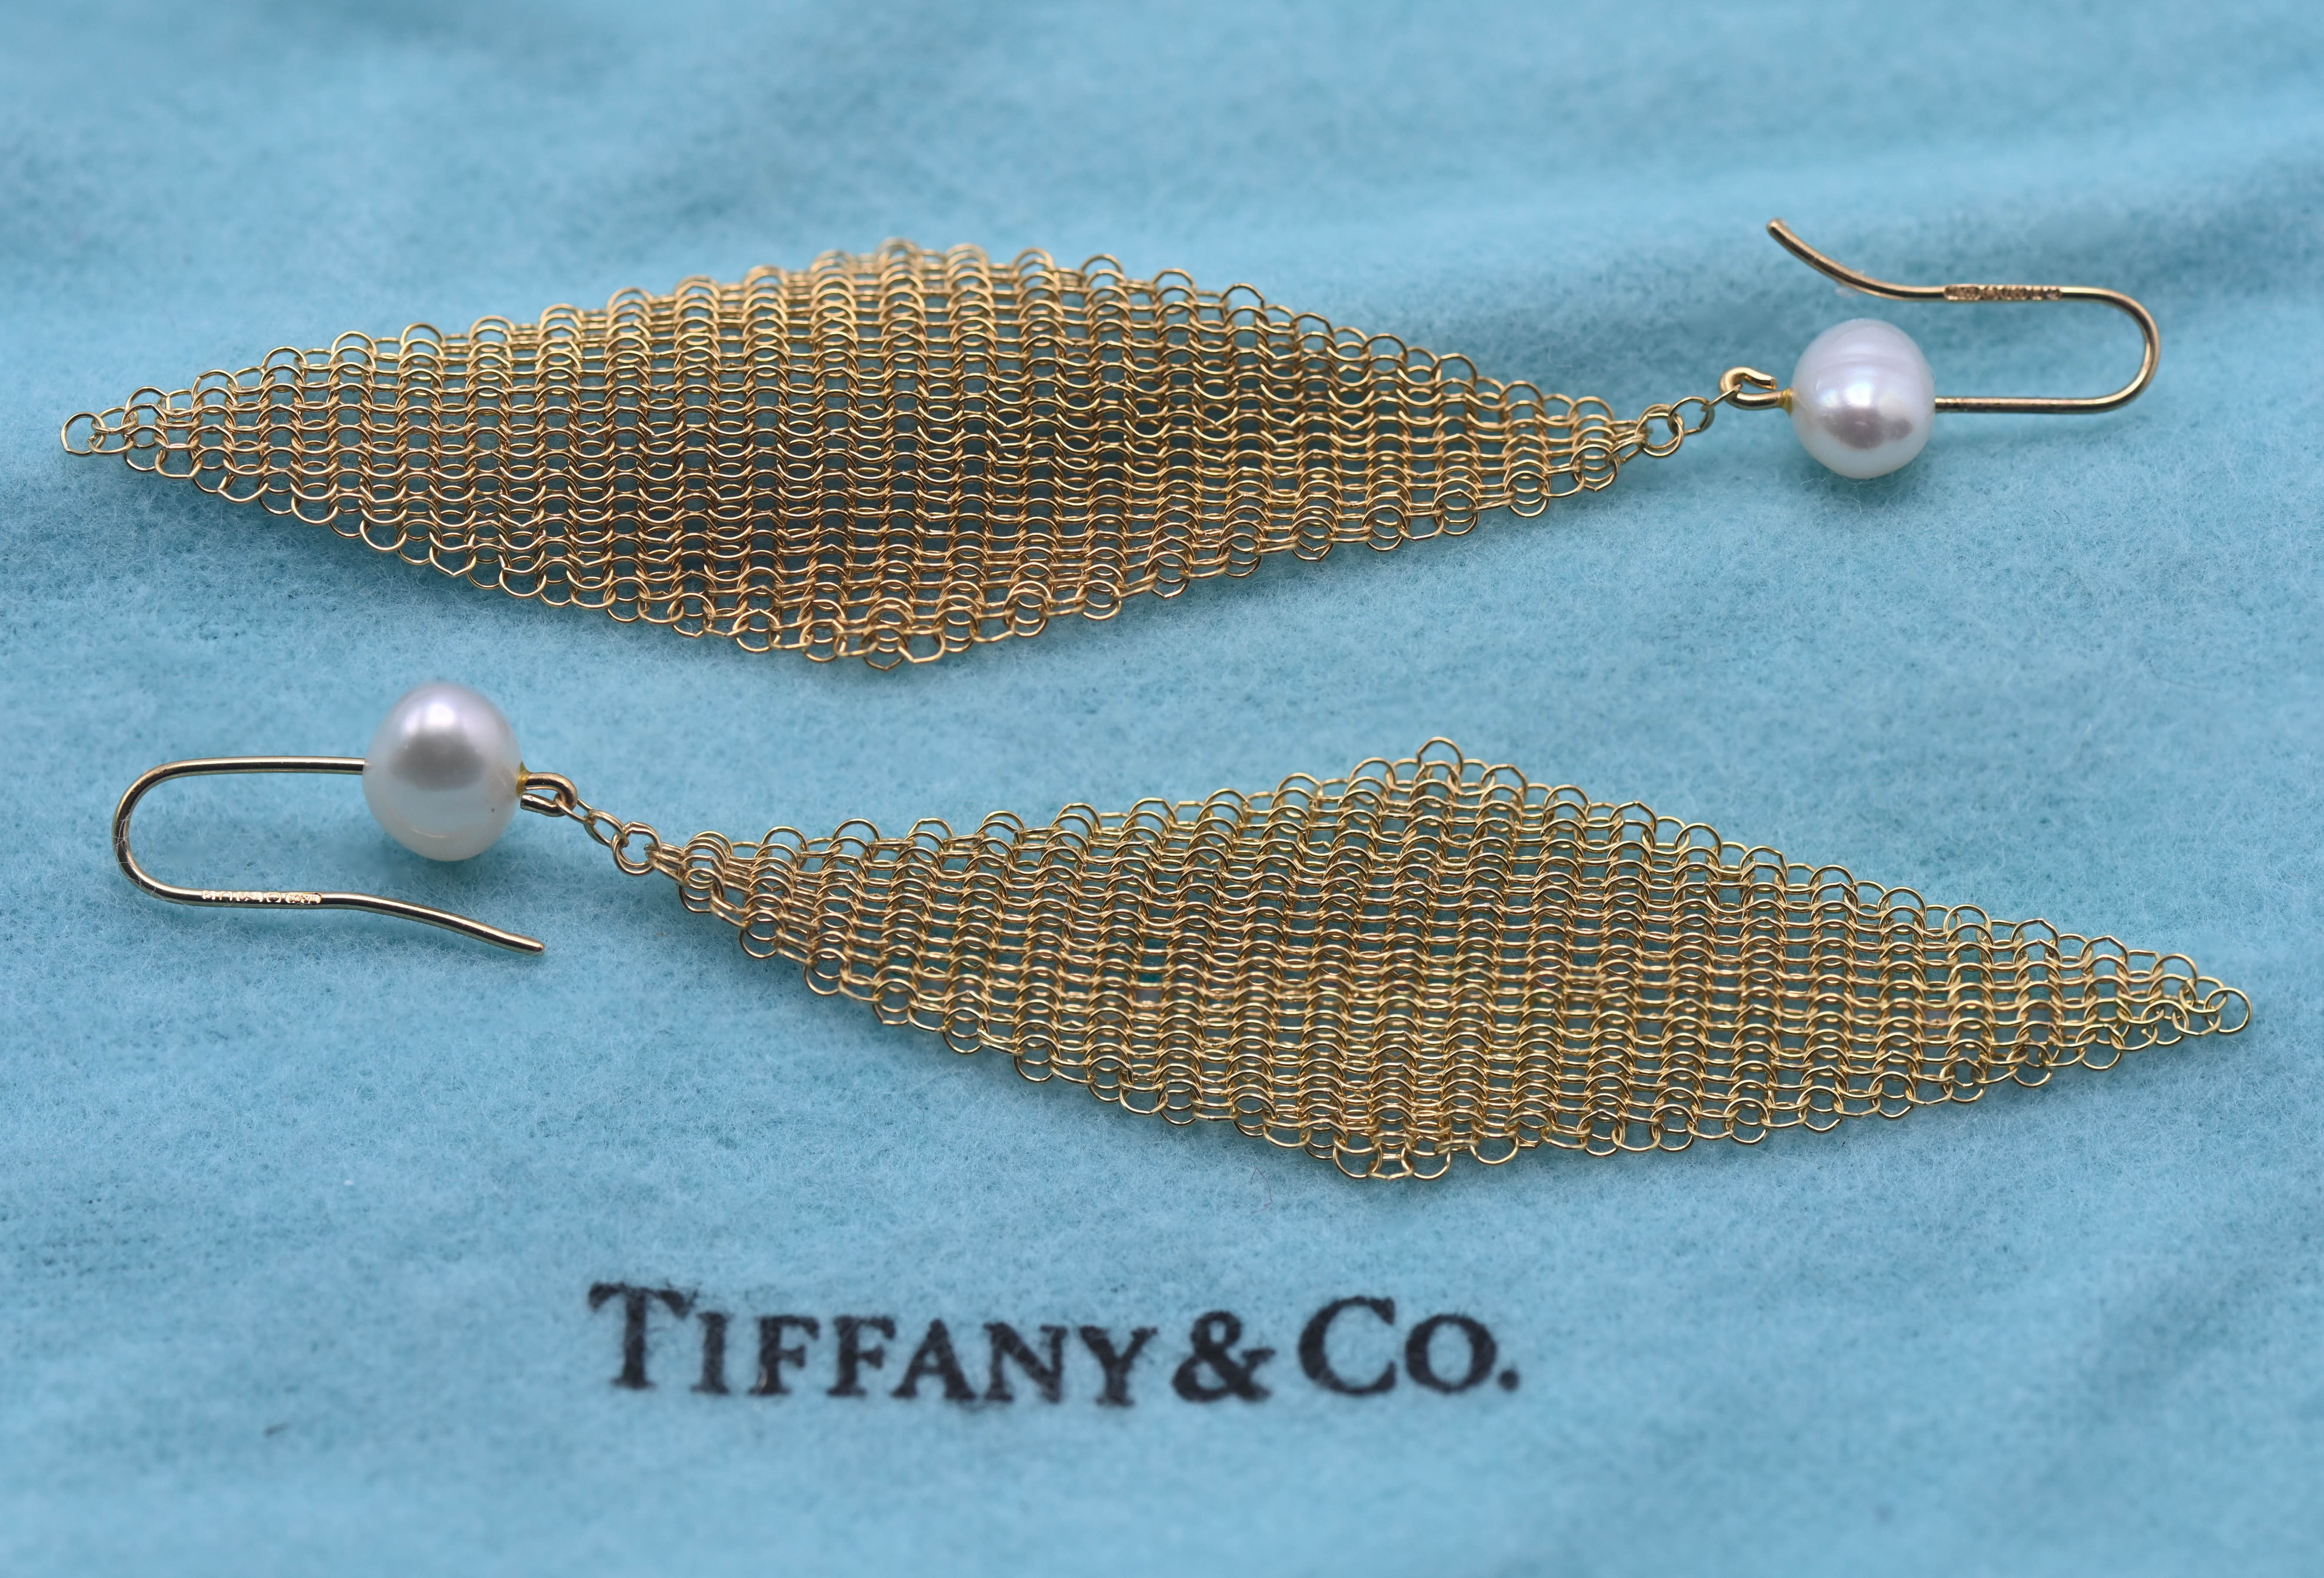 Tiffany & Co 18ct yellow gold and pearl earrings by Elsa Peretti, with box and pouch.